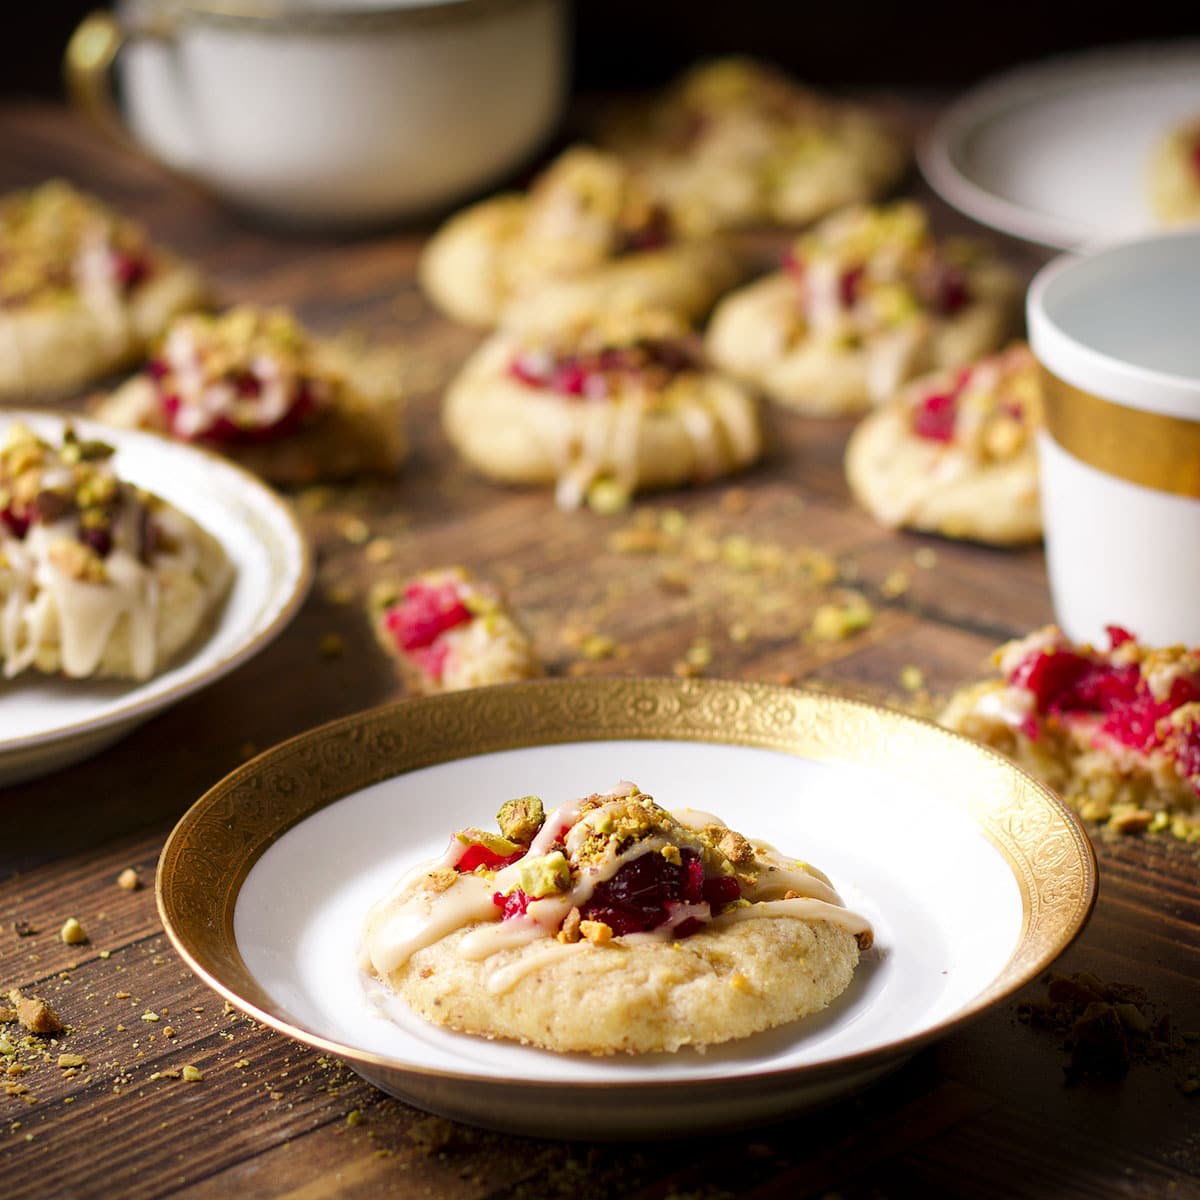 A cranberry pistachio cookie on a small gold-trimmed dessert plate with more cookies on the table all around the plate.